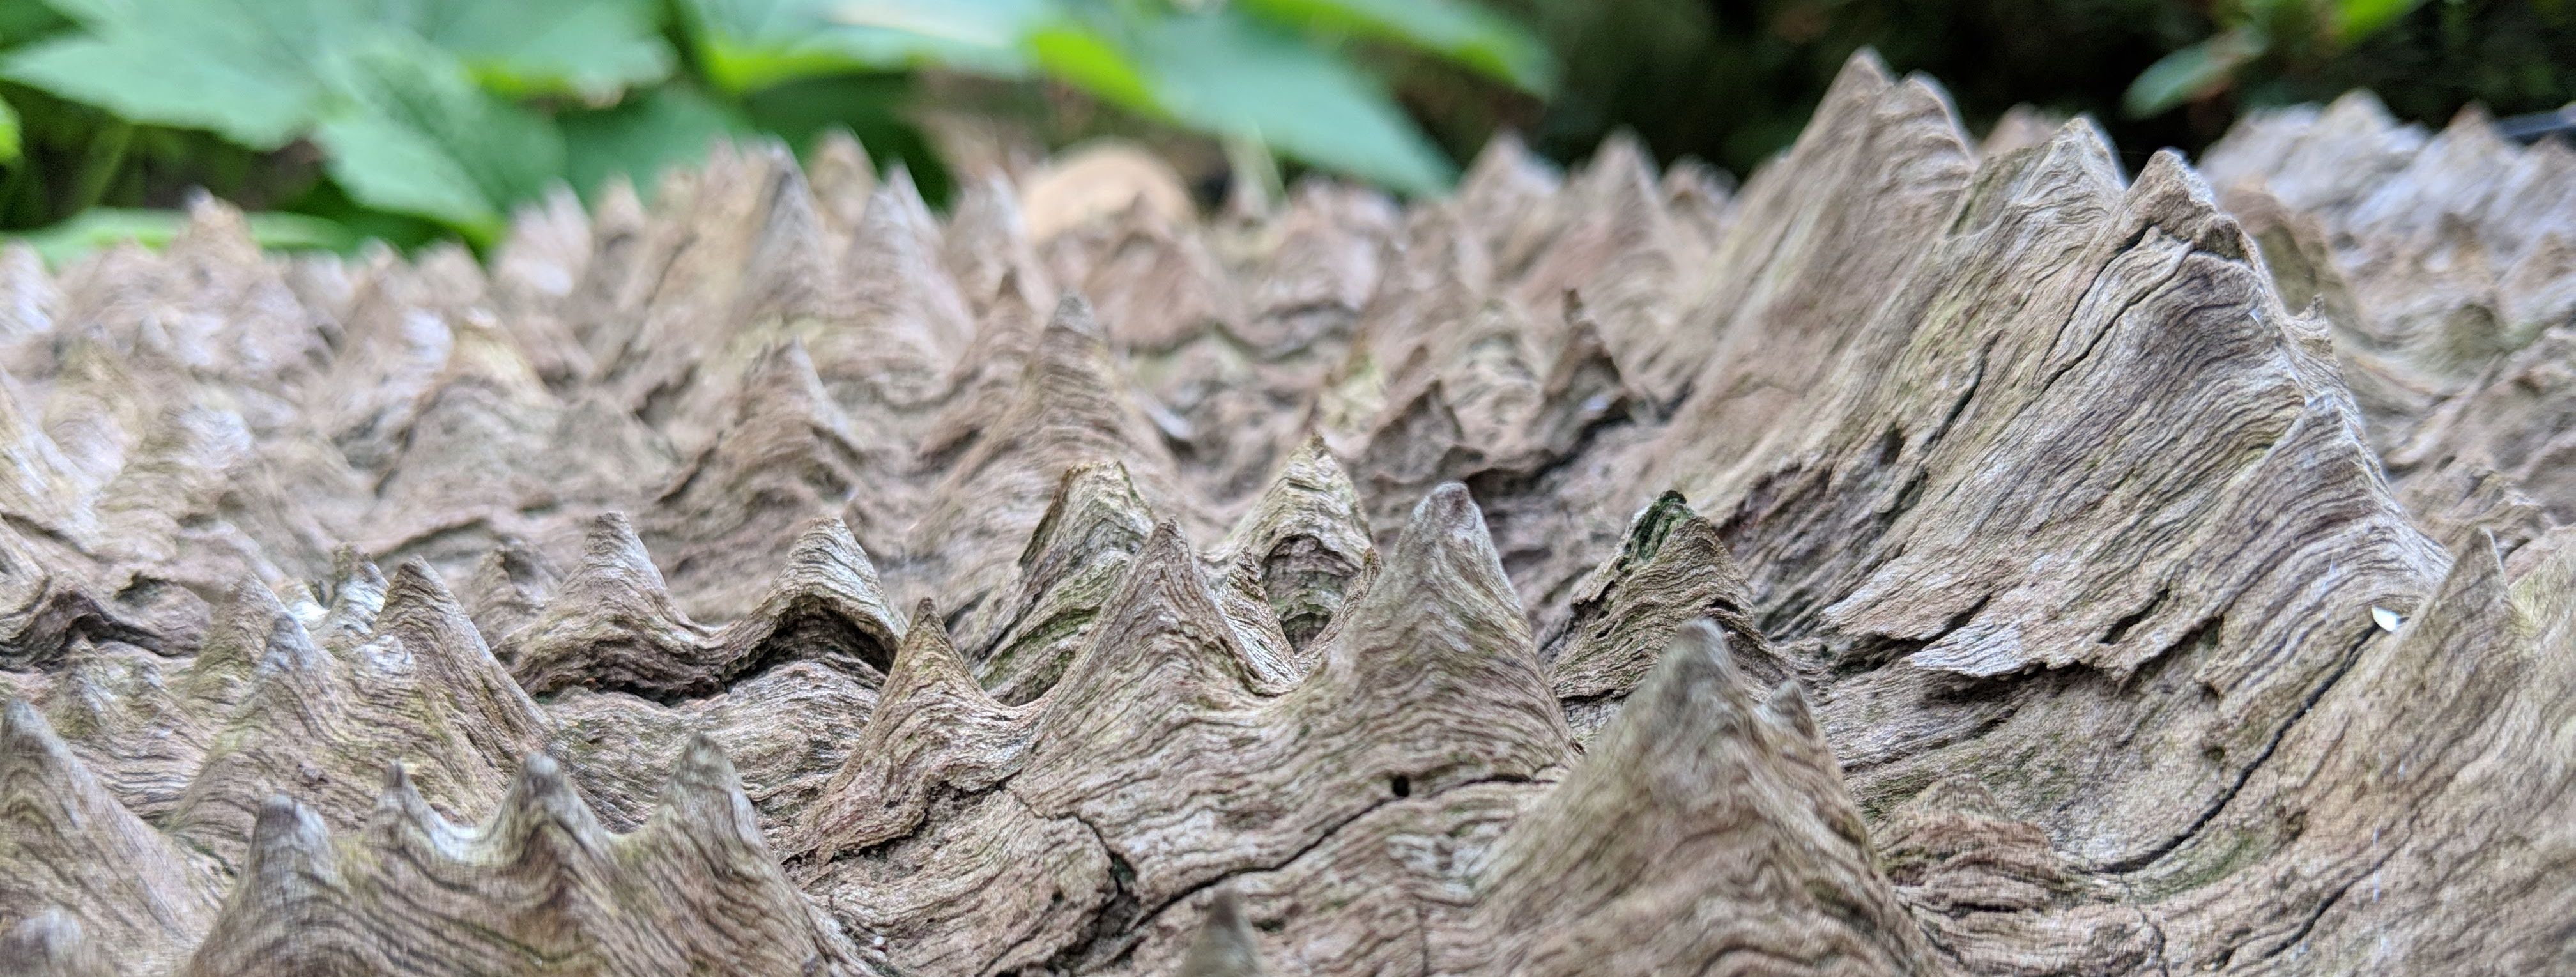 feature image - a close up of textures in timber